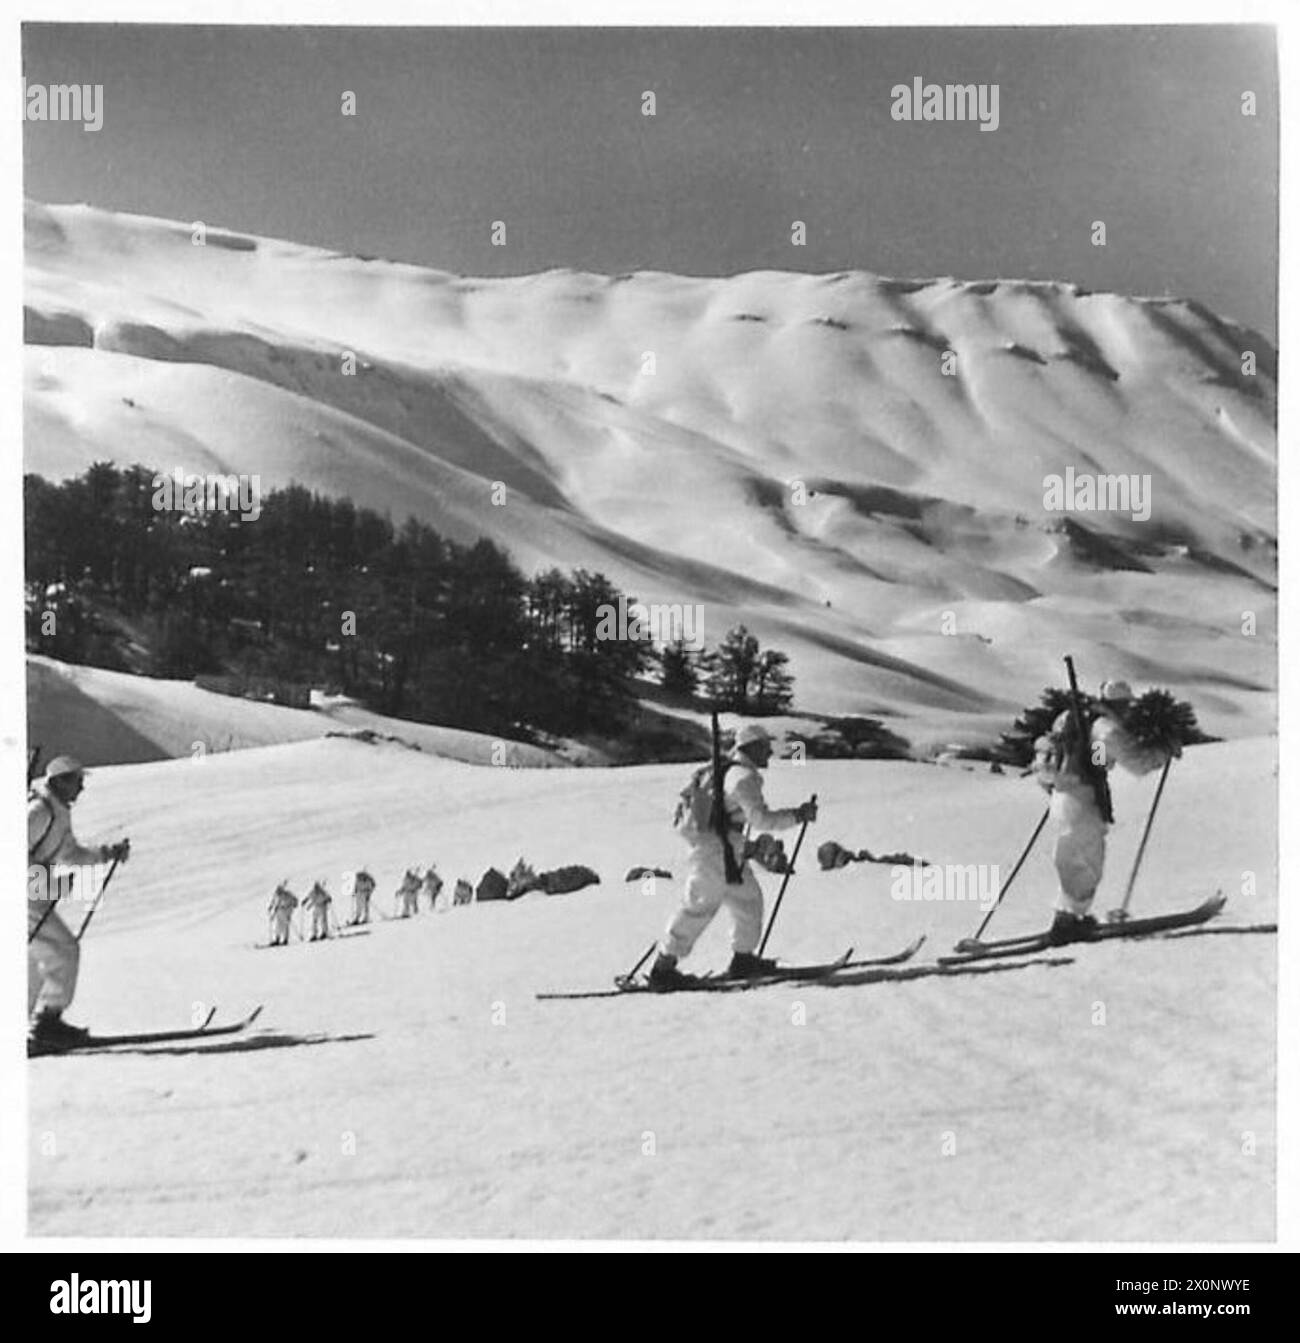 SKI TROOPS IN TRAINING - A party of ski troops making an ascent from their H.Q. Photographic negative , British Army Stock Photo